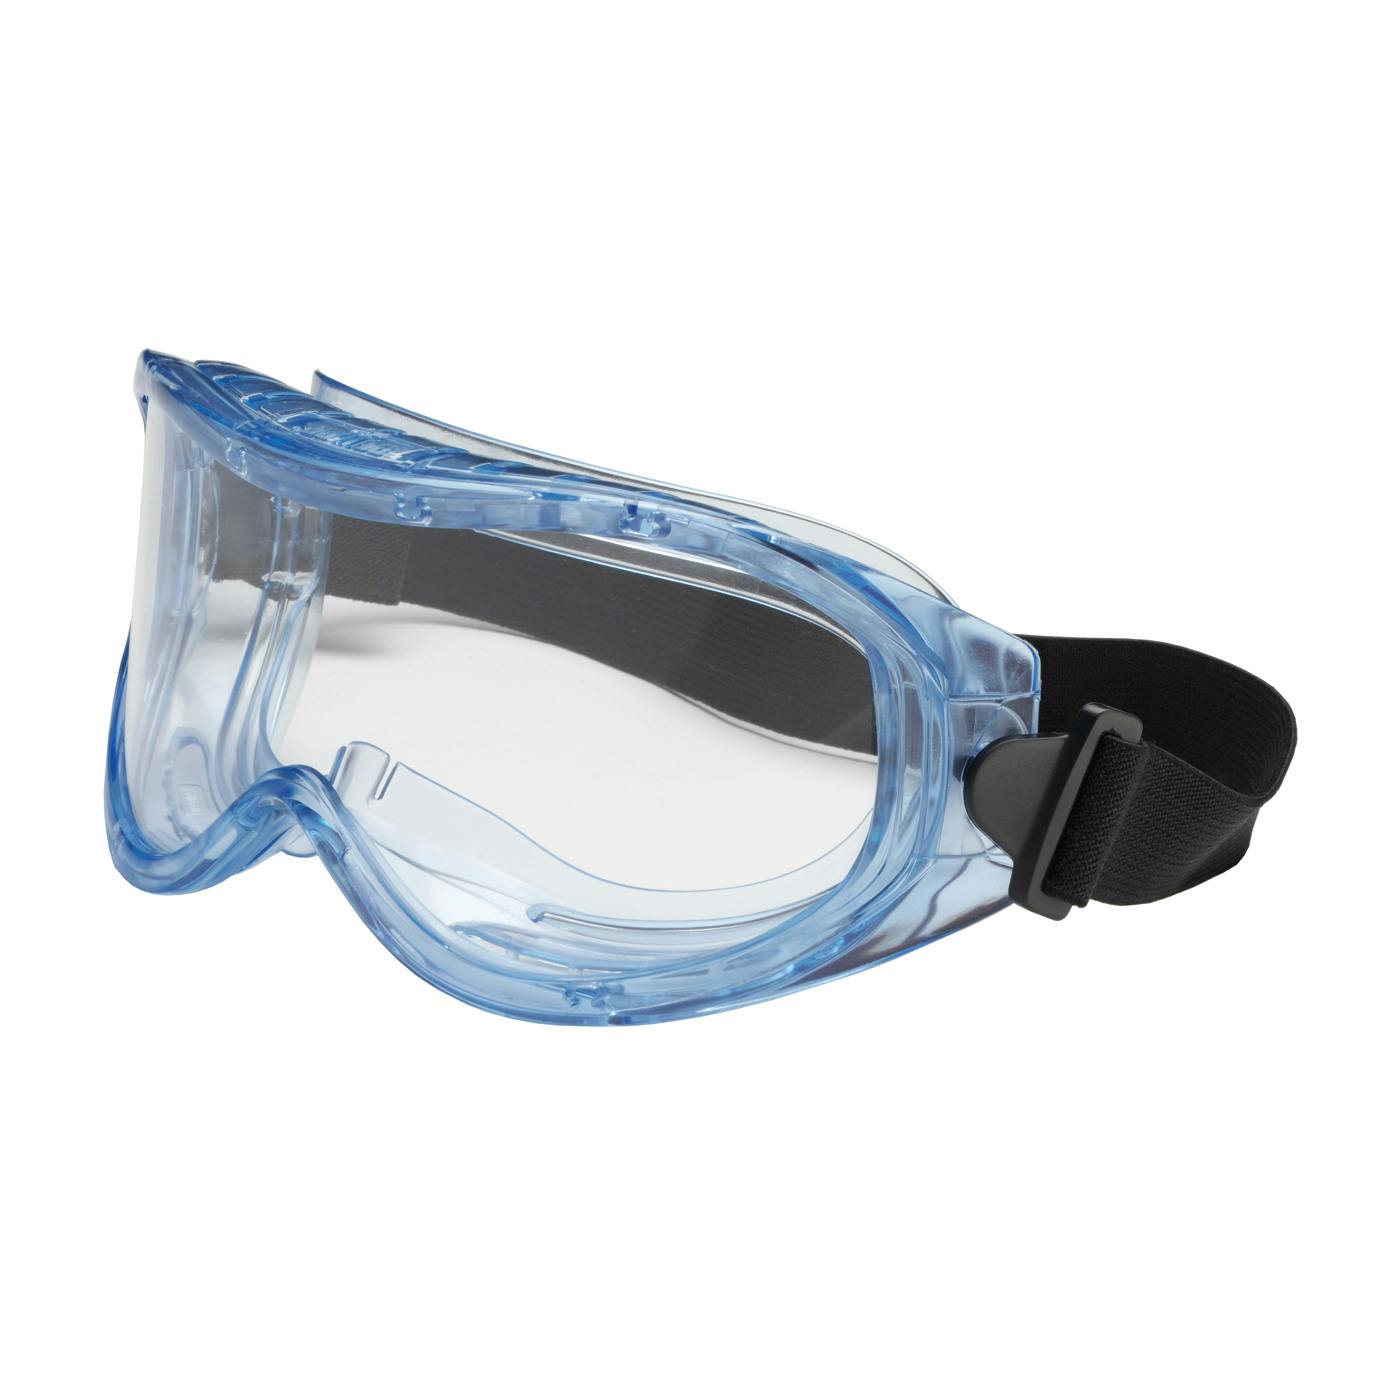 Indirect Vent Goggle with Light Blue Body, Clear Lens and Anti-Scratch / Anti-Fog Coating, Light Blue (251-5300-400) - OS